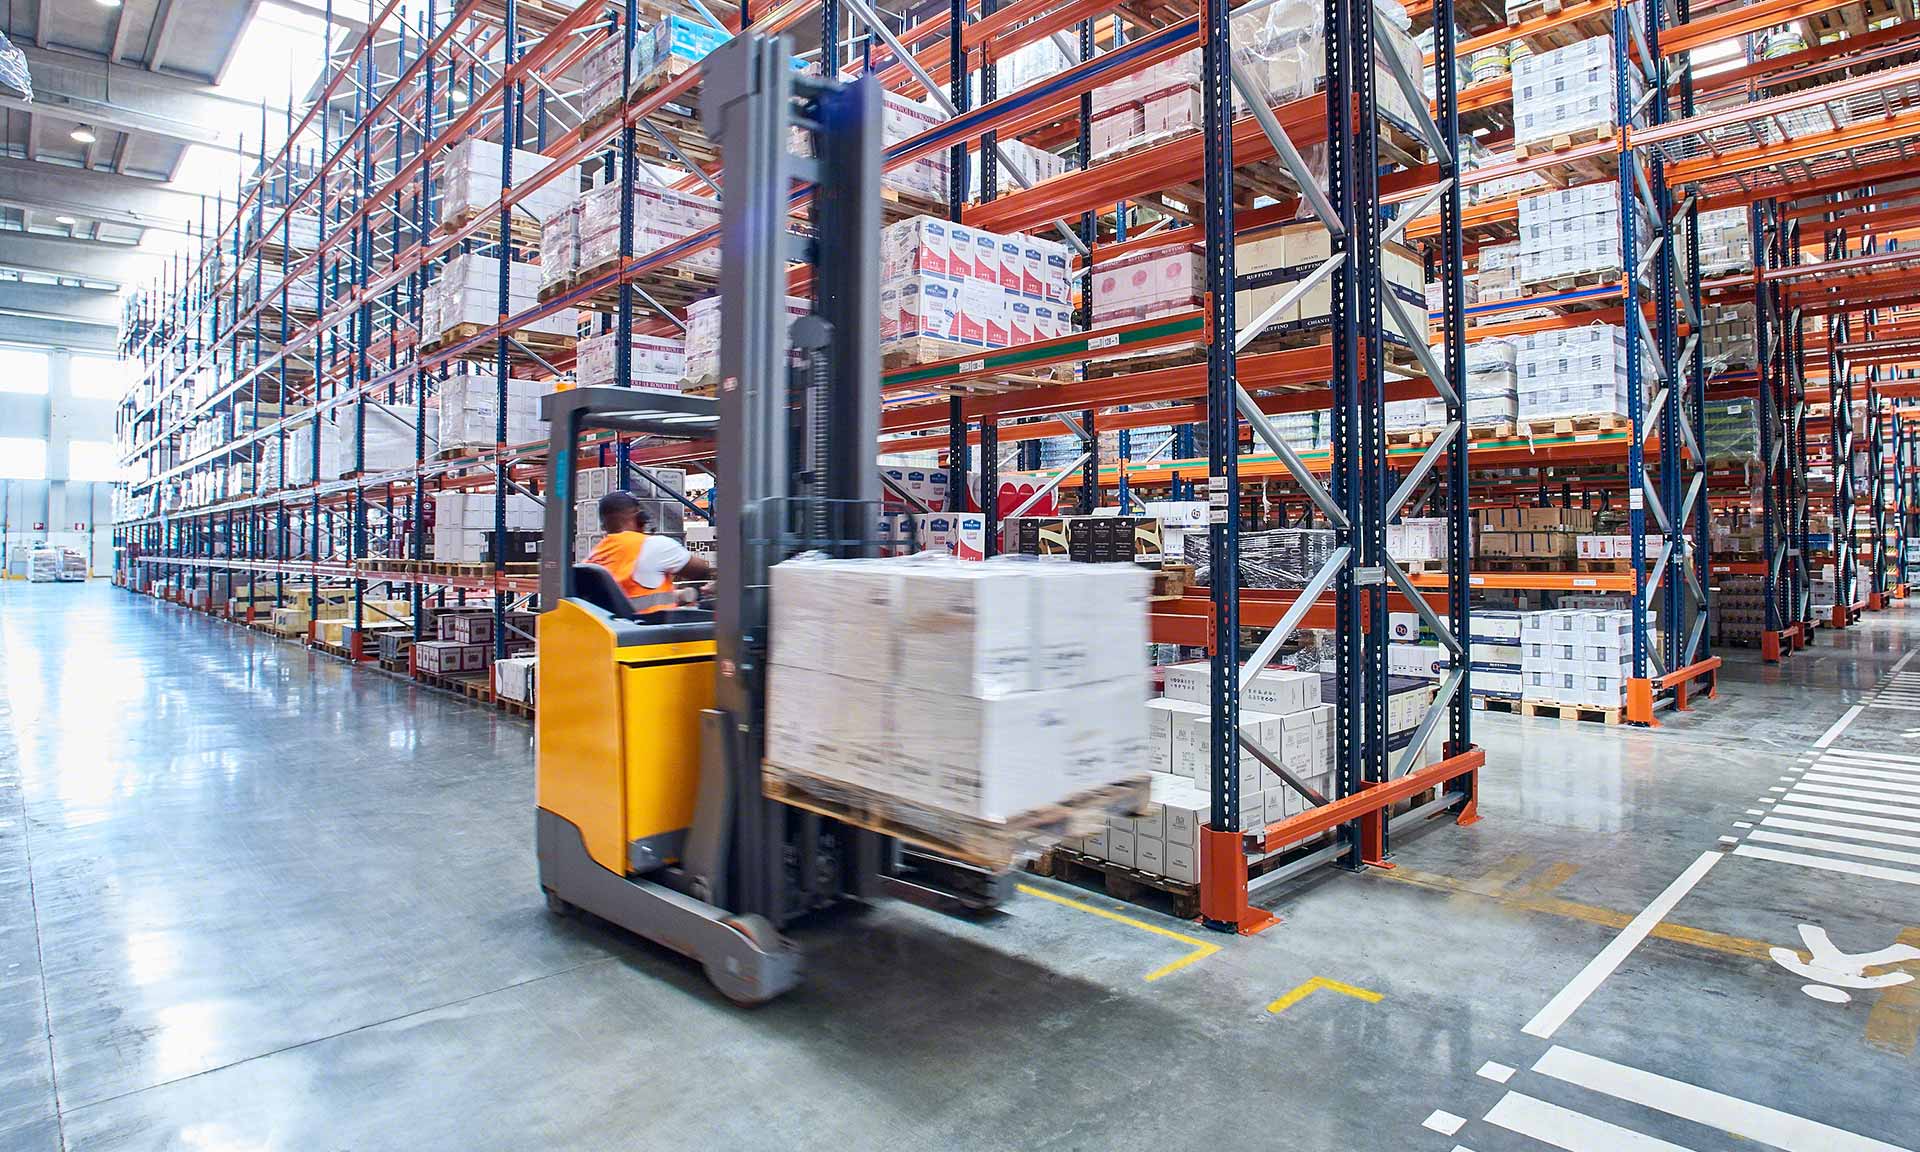 Forklifts are pieces of handling equipment that streamline flows of palletized goods in warehouses